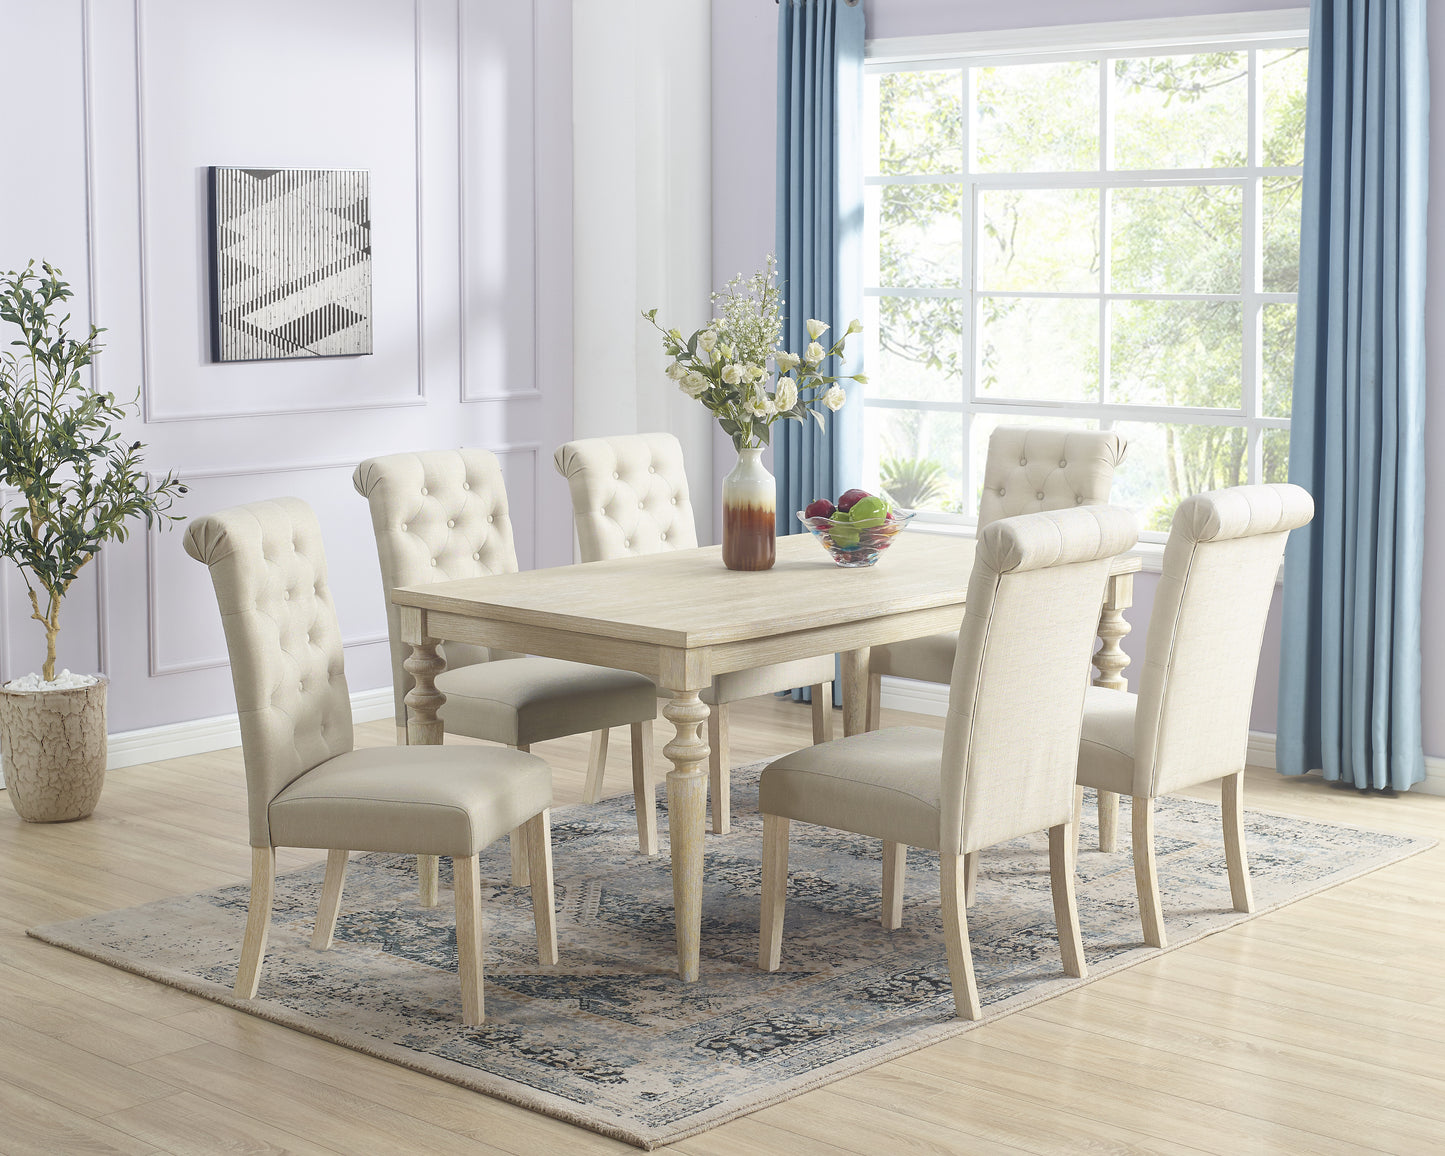 Amonia 7-piece Dining Set, Turned-Leg Dining Table with 6 Tufted Chairs